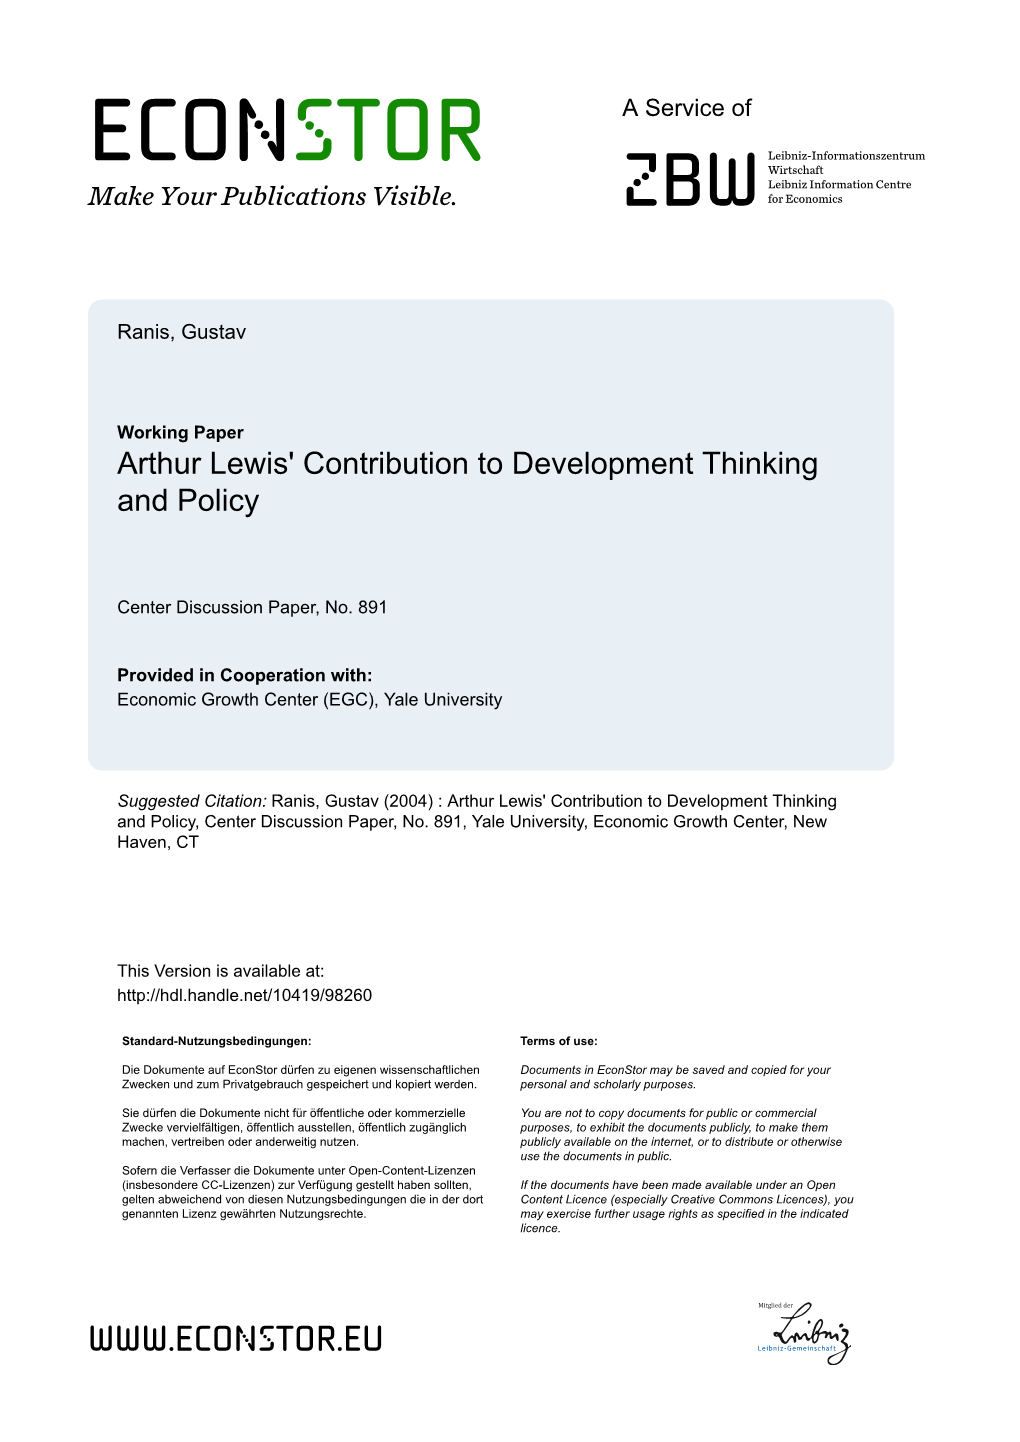 Arthur Lewis' Contribution to Development Thinking and Policy